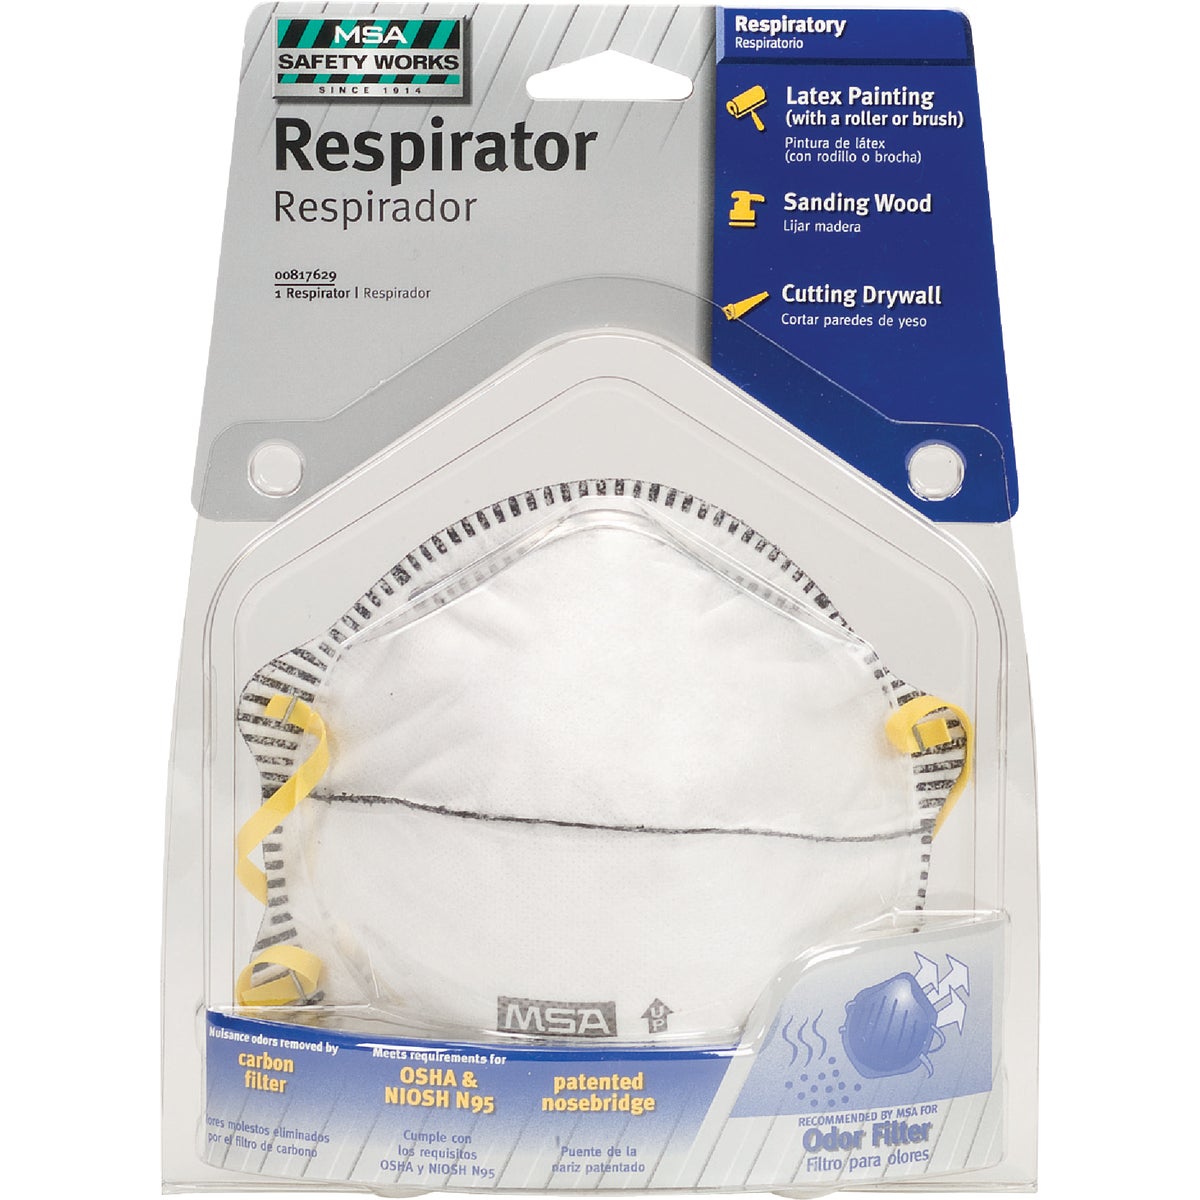 Item 361183, Dust respirator featuring a built-in carbon filter which removes nuisance-